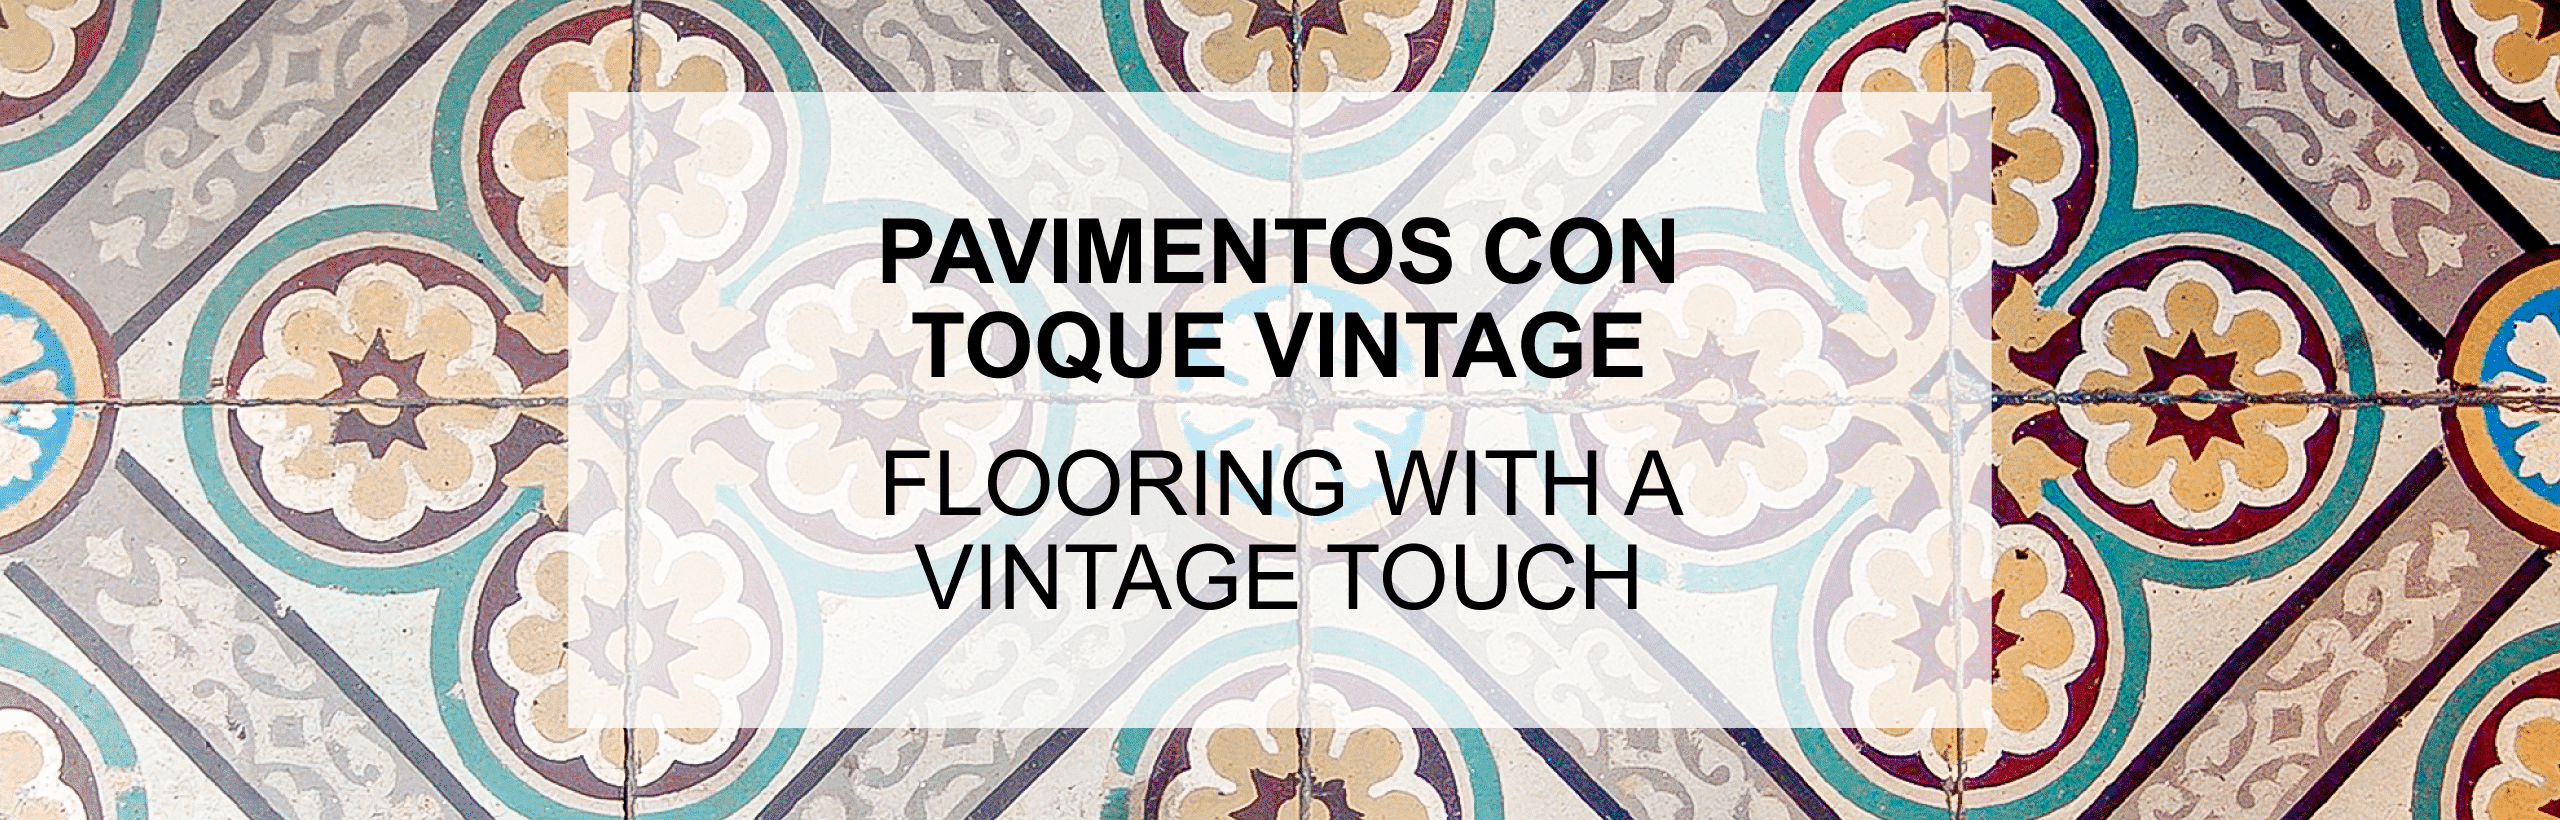 Flooring with a vintage touch